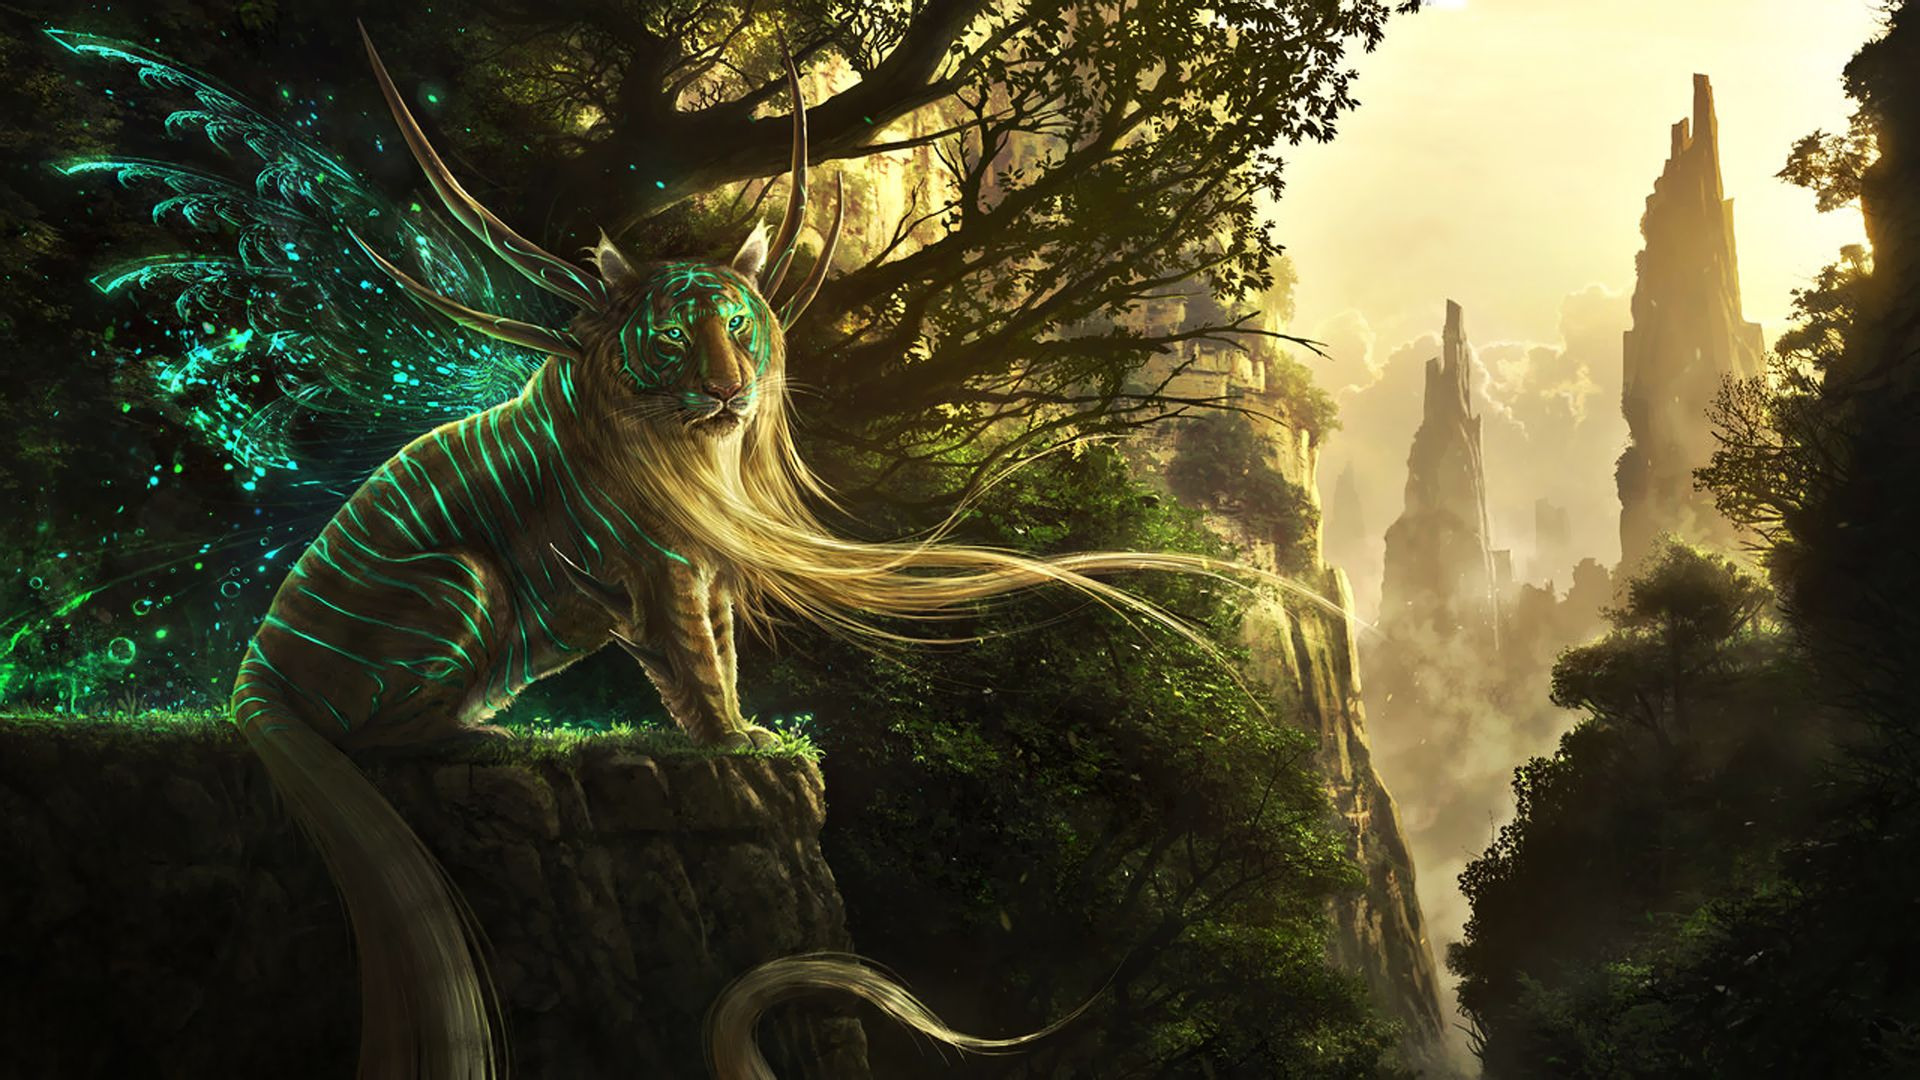 1920x1080 Lord of Tigers | Sea creatures art, Mythical creatures, Fantasy creatures